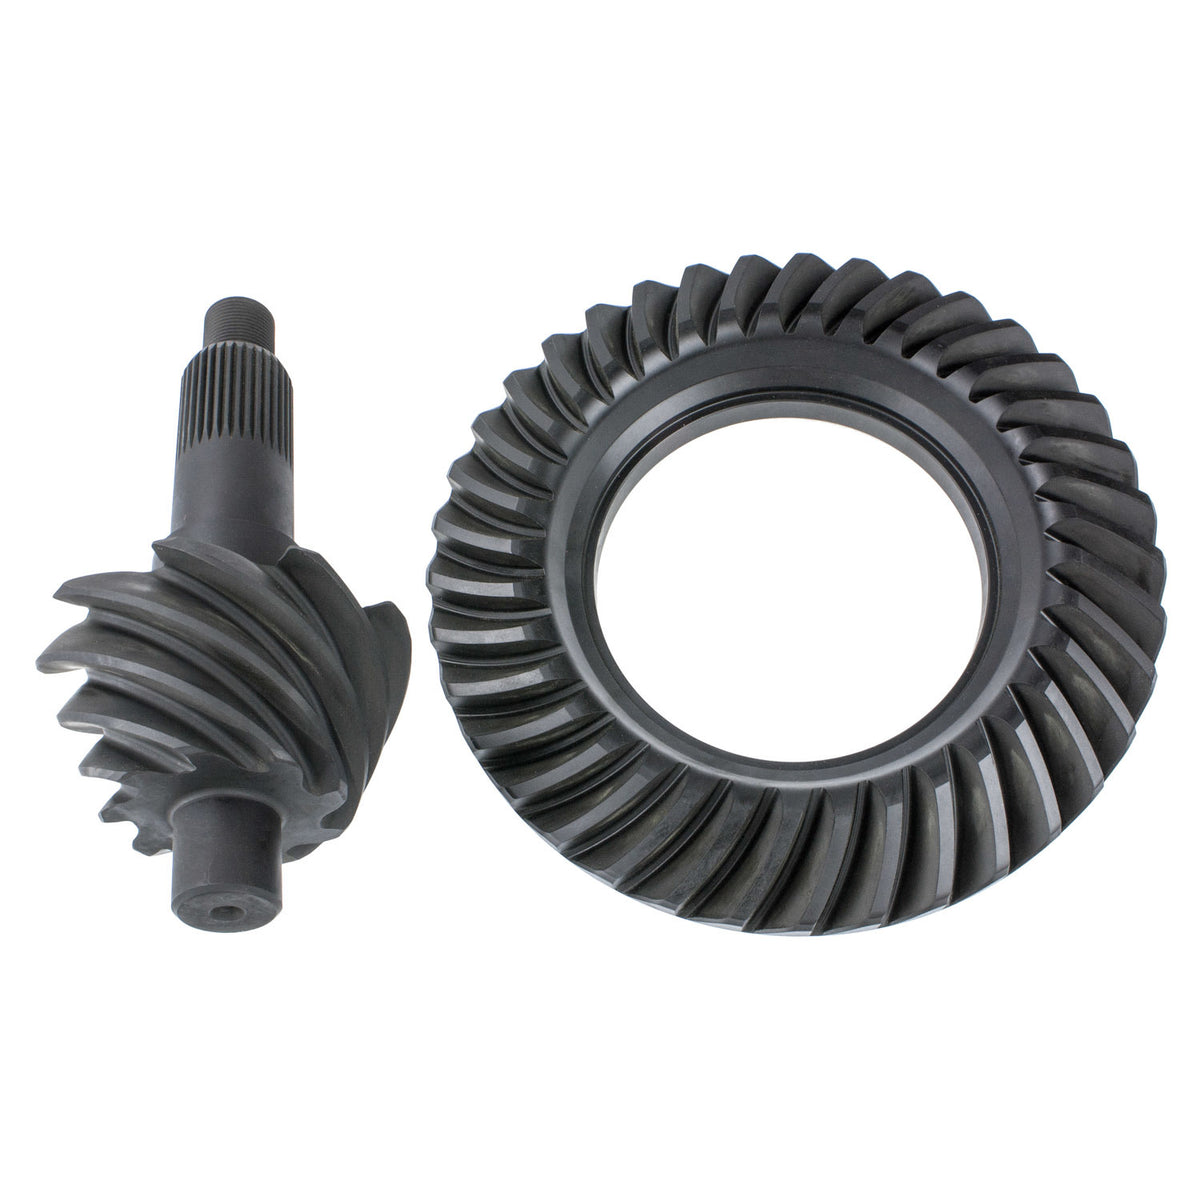 4.11 Ratio Ford 9.5in Pro Gear Ring & Pinion